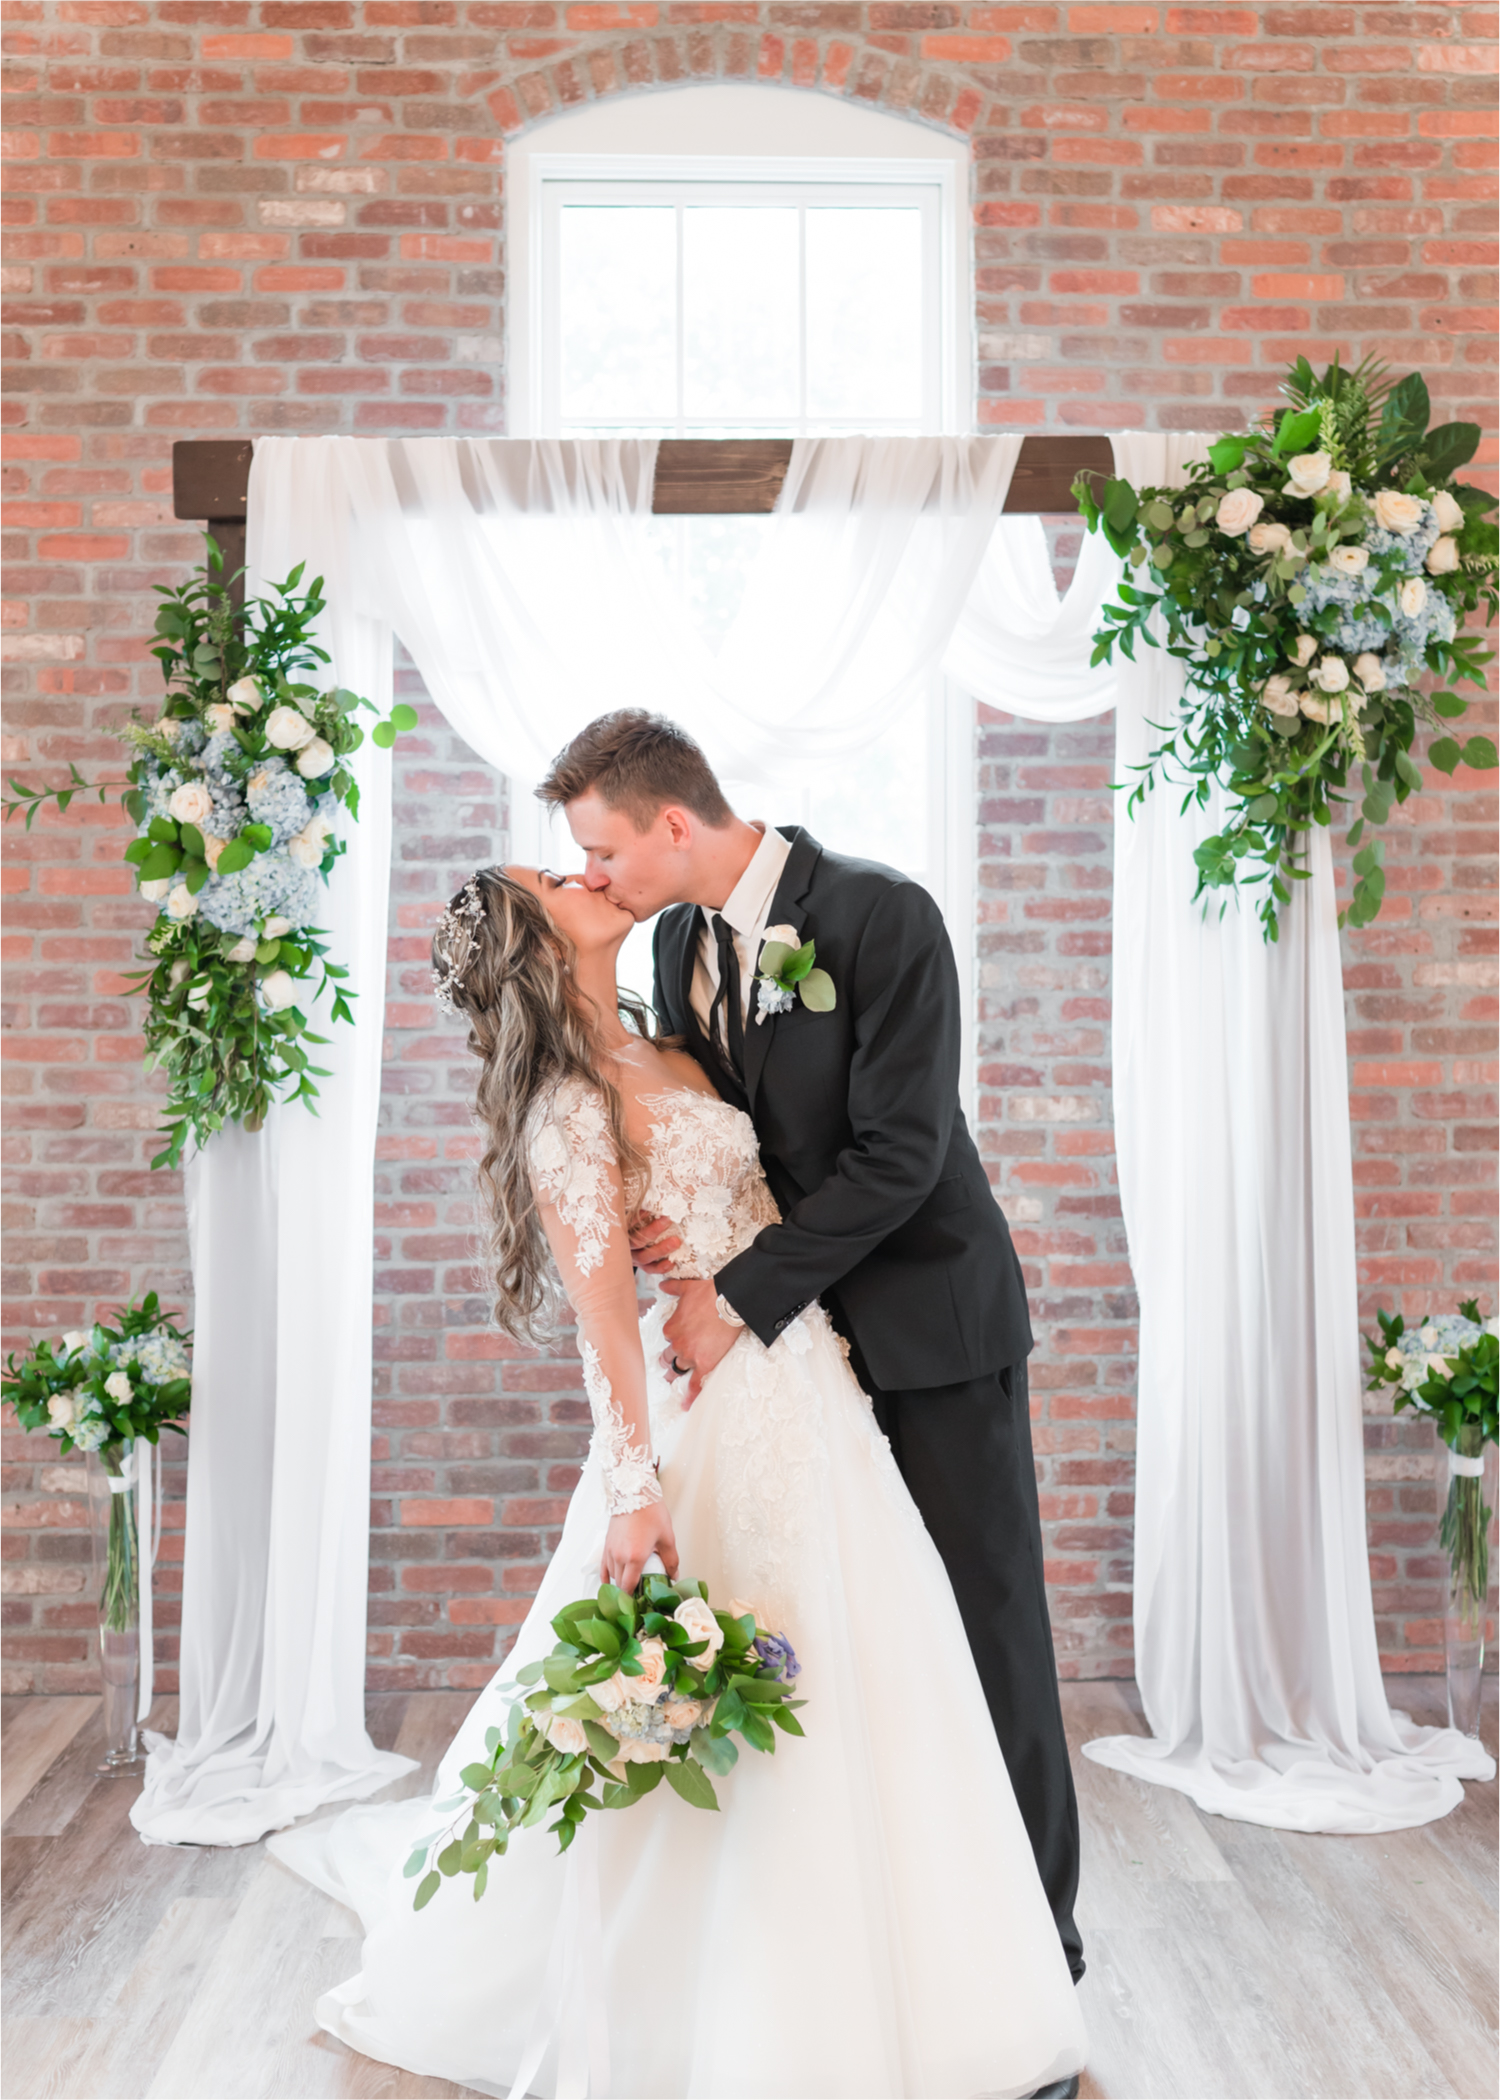 Romantic and Rustic Wedding at The Mill in Windsor | Britni Girard Photography | Colorado based wedding photography and videography team | Bride and groom just married portraits